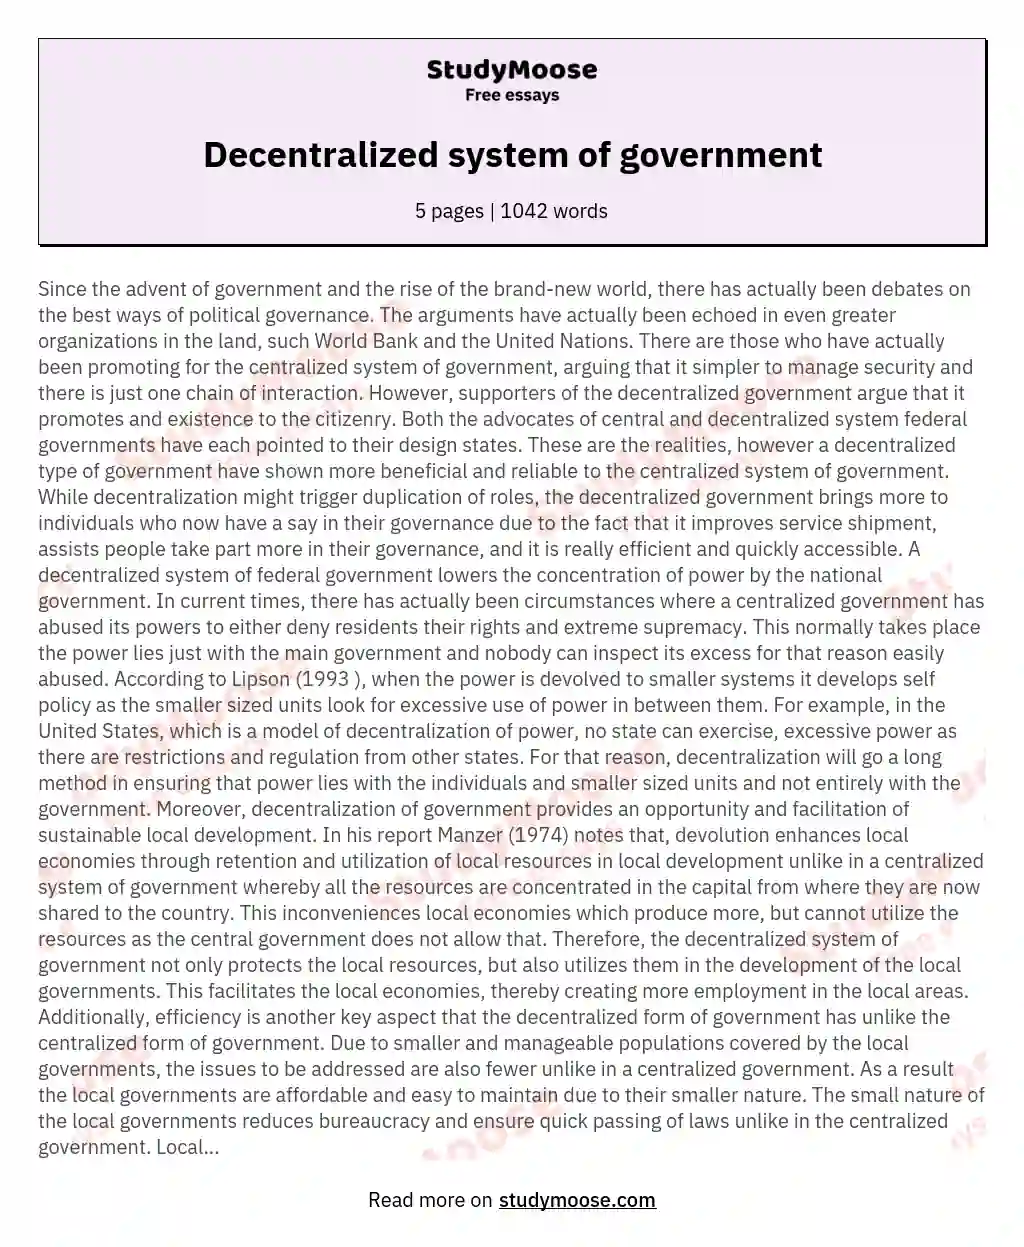 Decentralized system of government essay